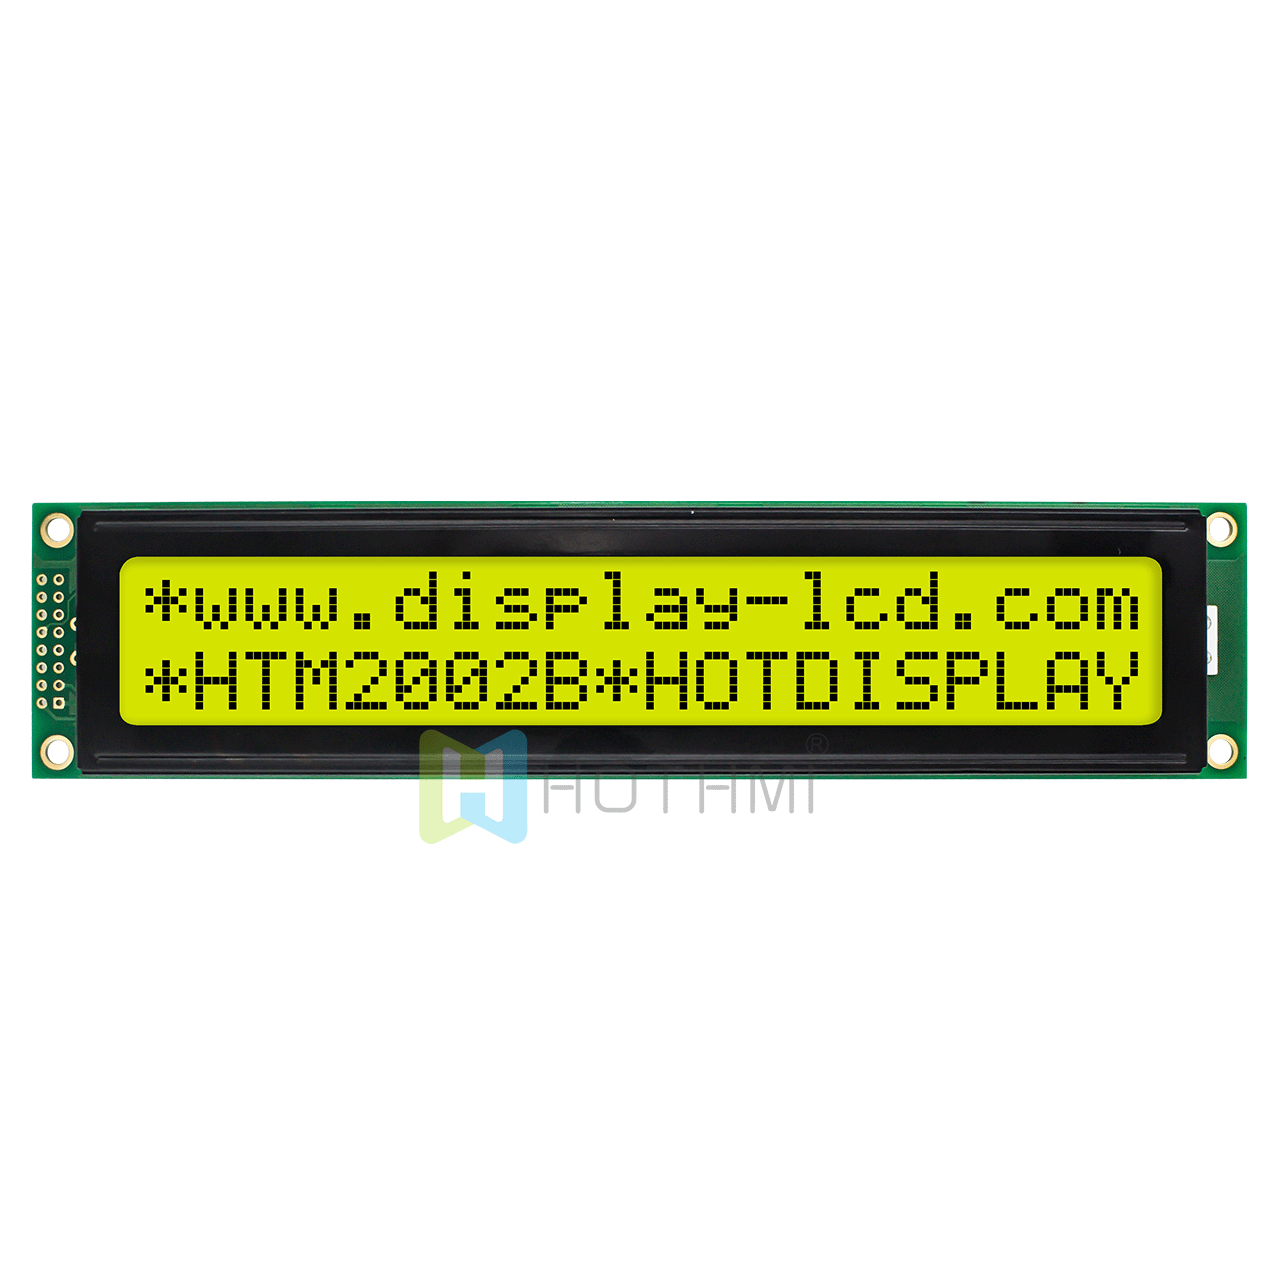 20X2 character monochrome LCD screen module/STN front display/yellow-green backlight/5.0V/ST7066U control/Adruino/transflective display/wide temperatur